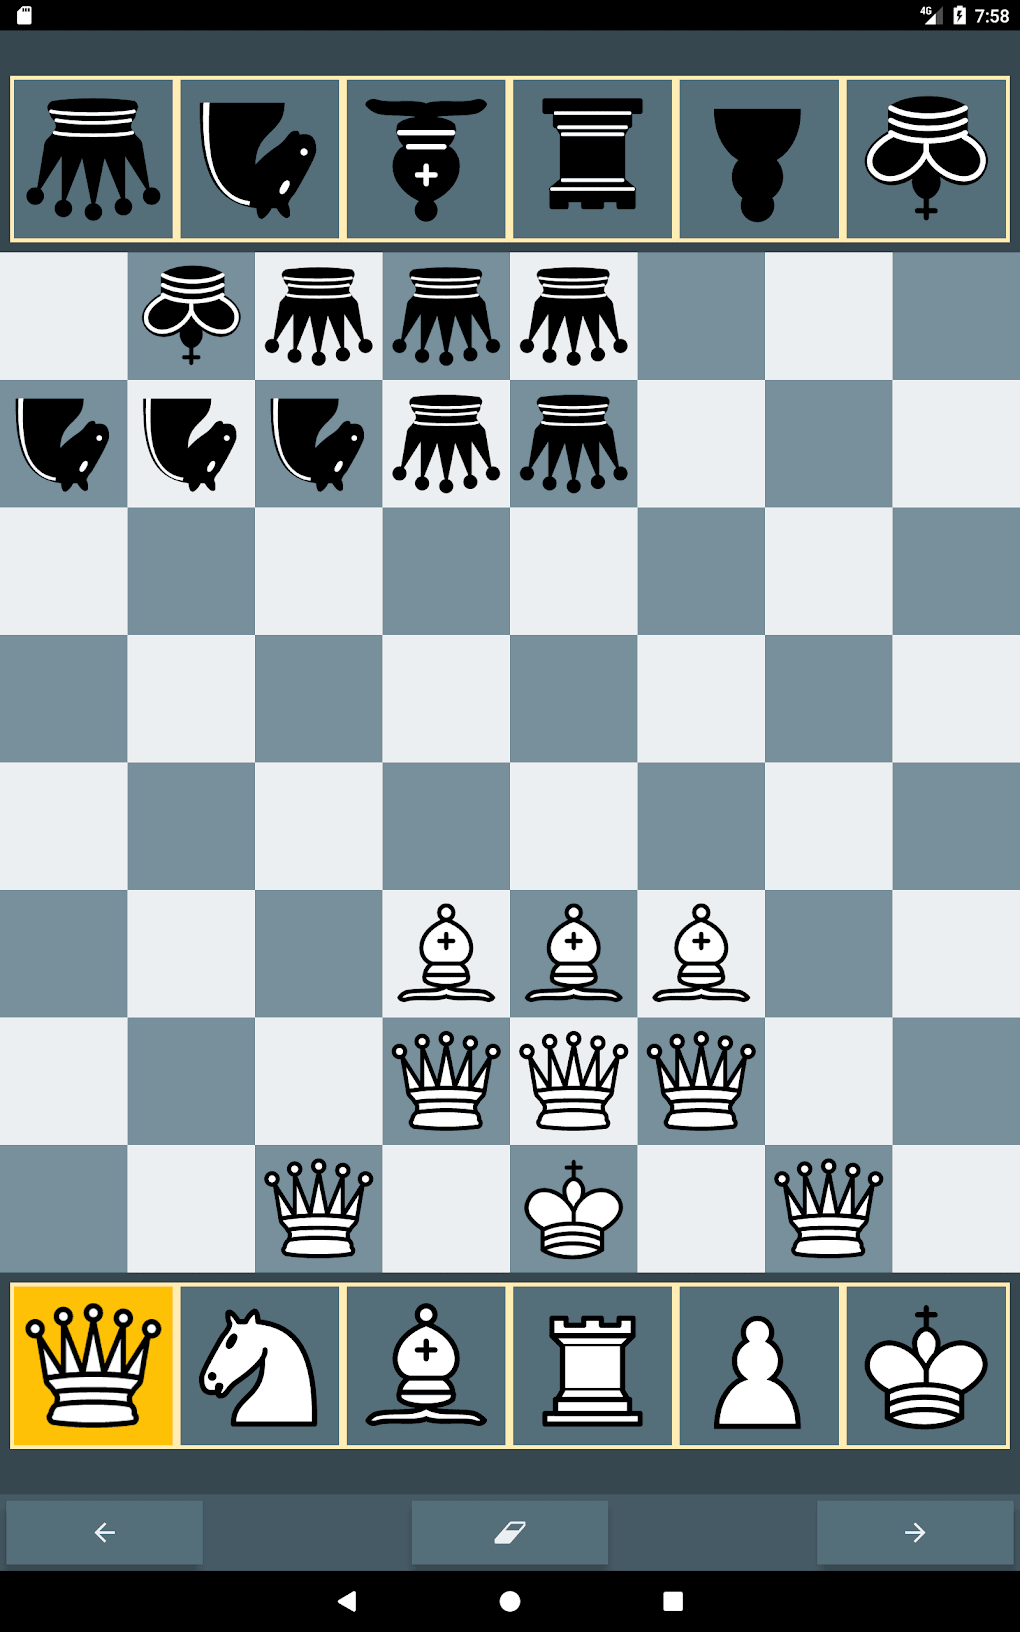 Chess online 2 player free / Free 2 player chess /